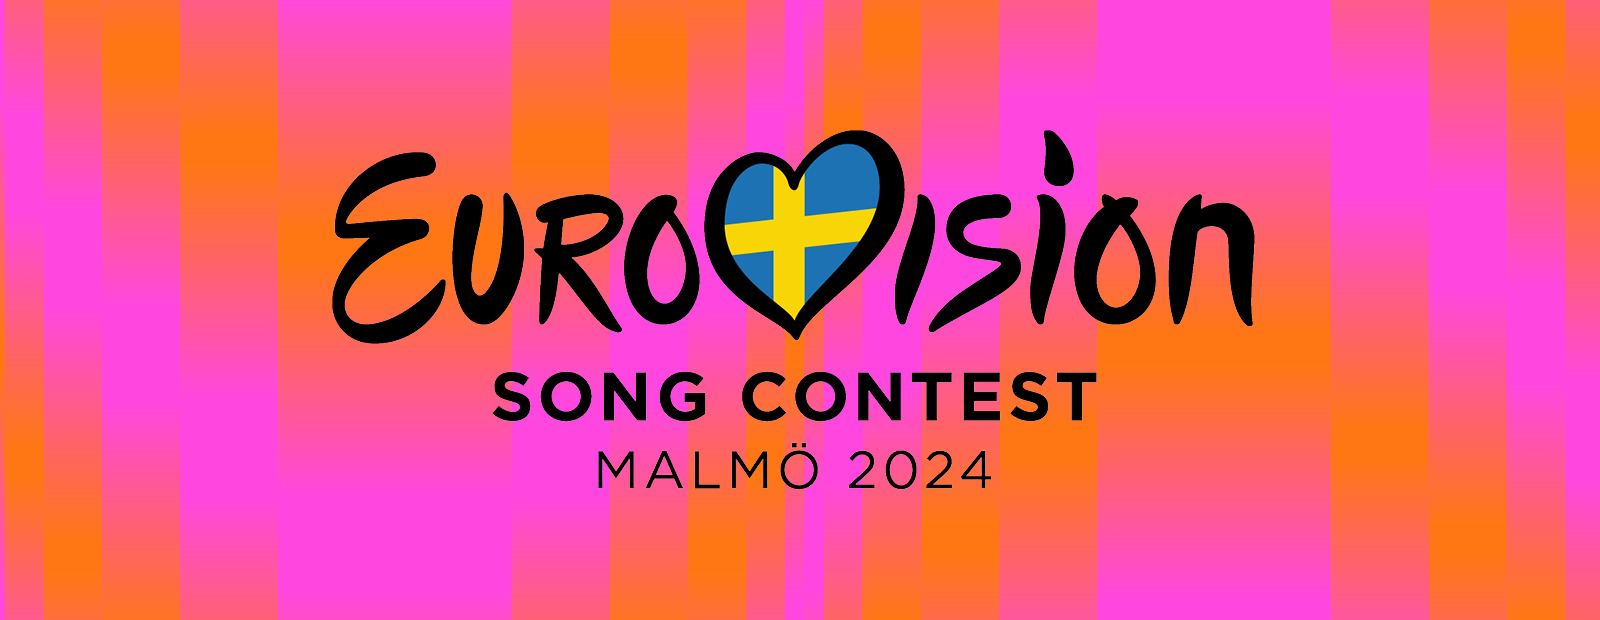 Eurovision Song Contest 2024 Semifinal 1 - Live Show